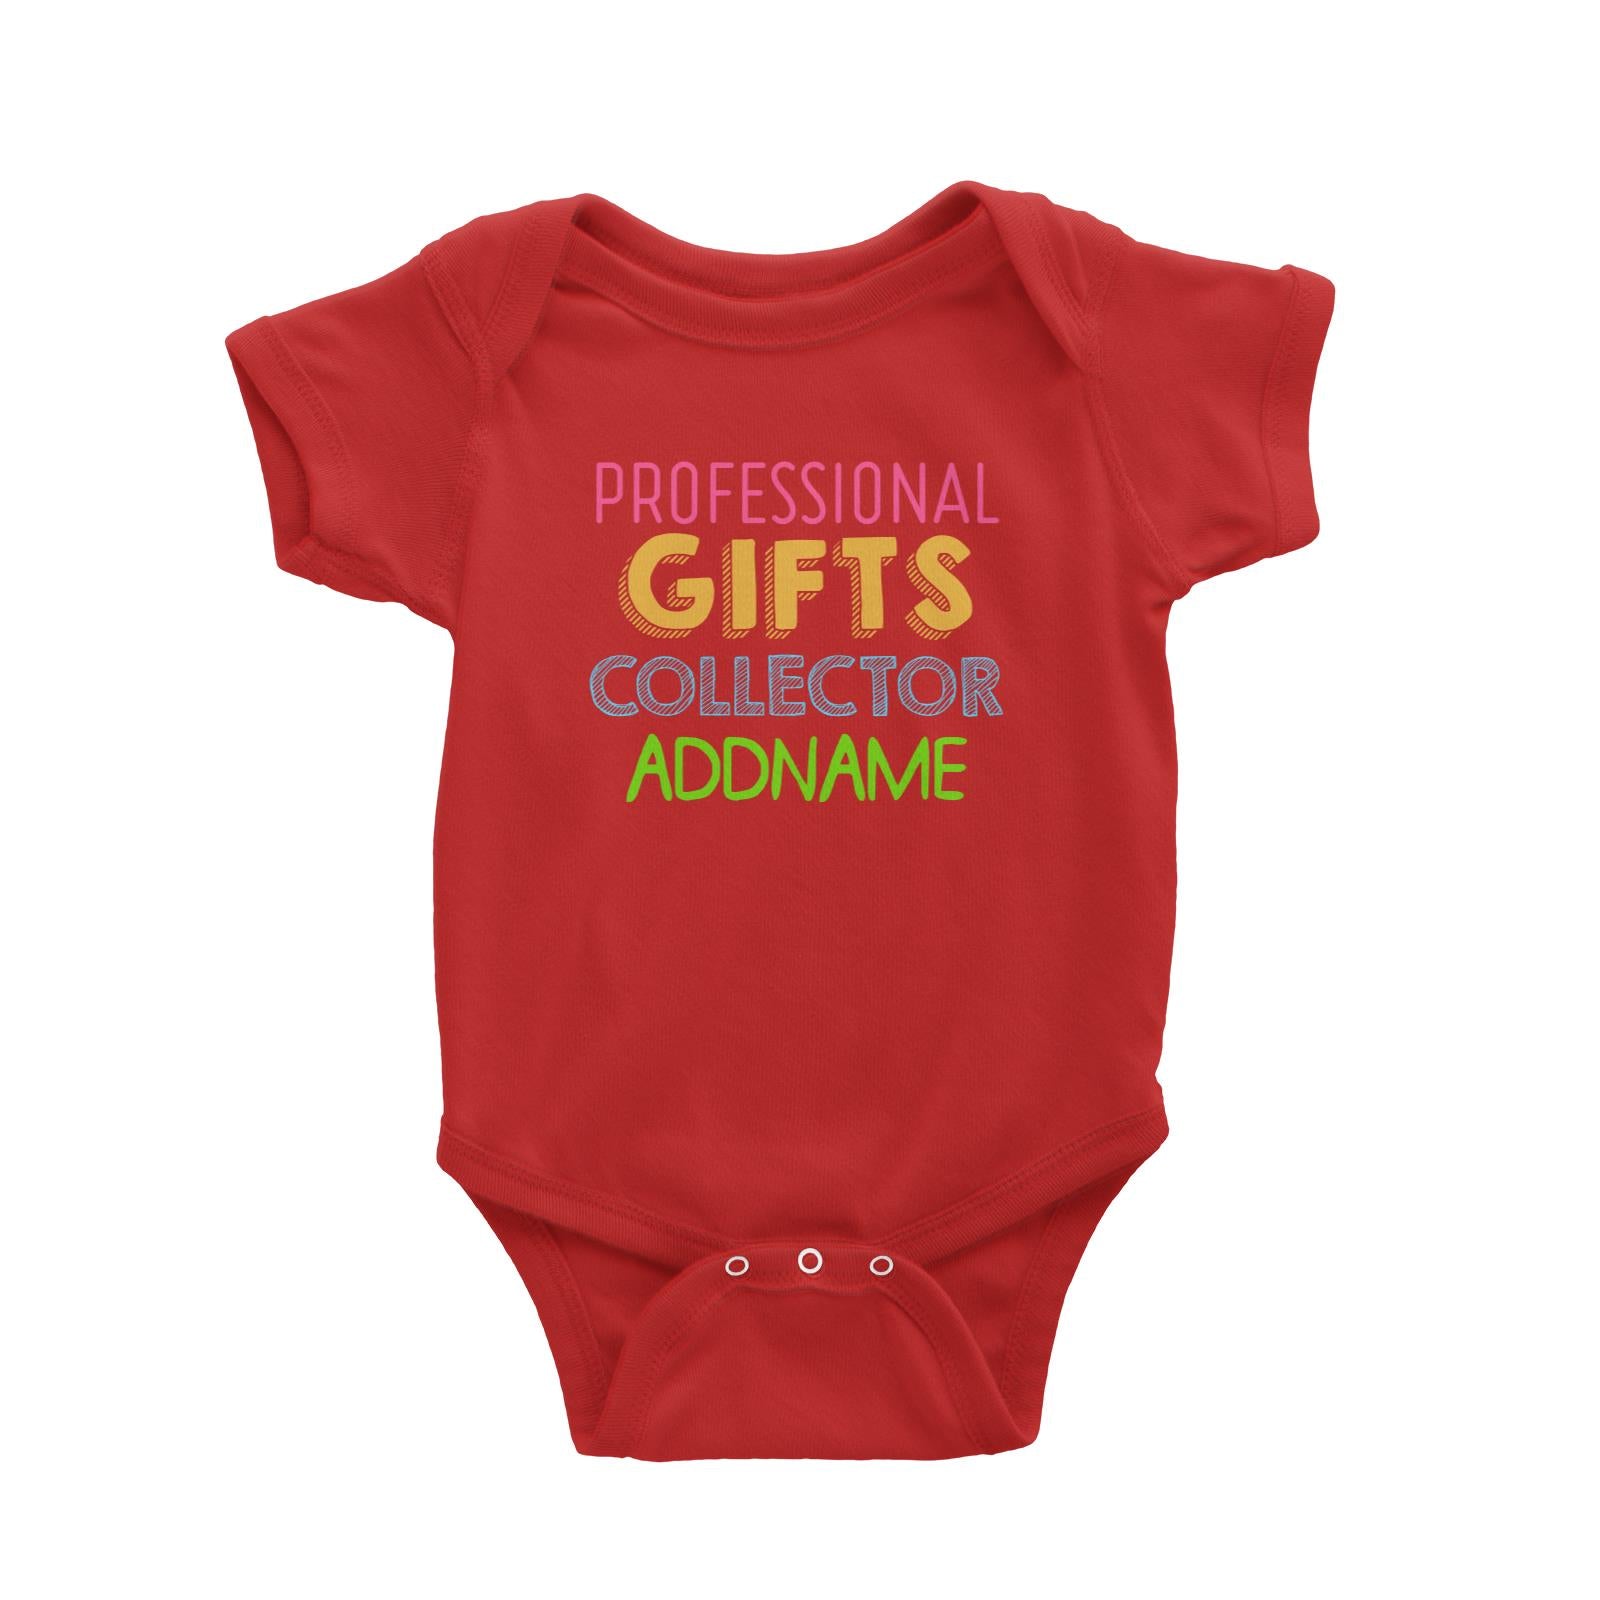 Professional Gifts Collector Addname Baby Romper